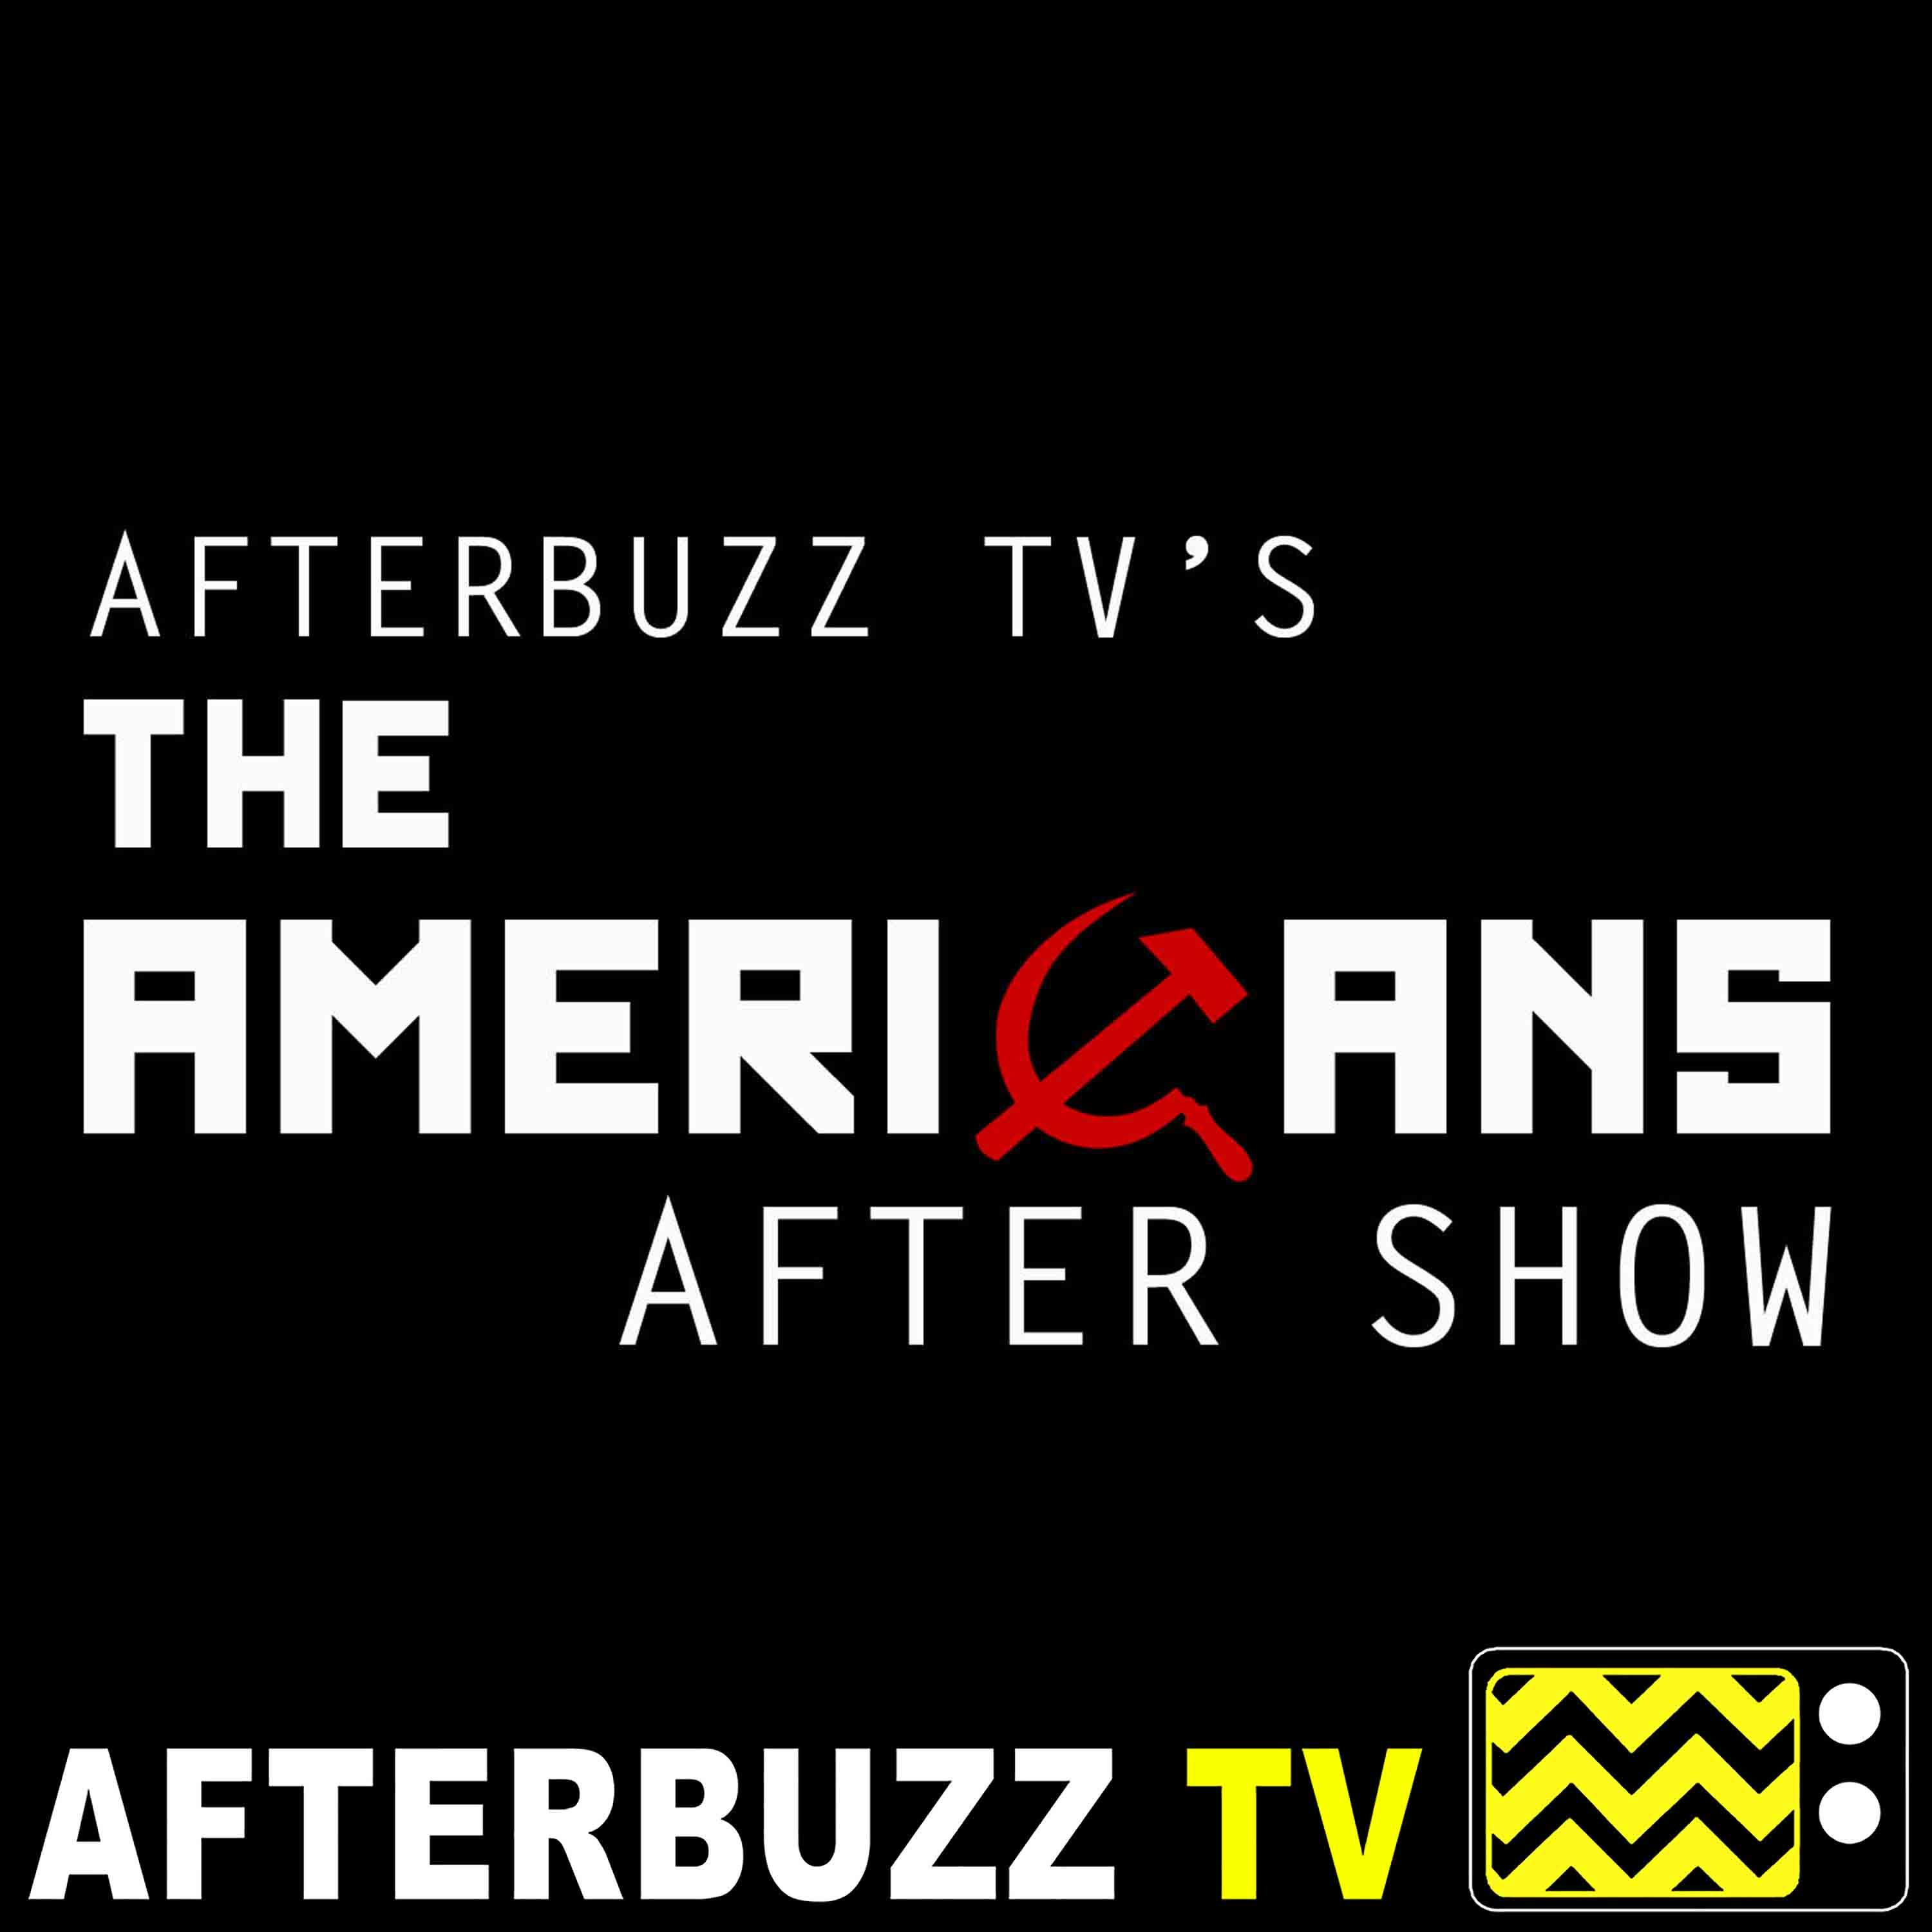 The Americans S:5 | The World Council Of Churches; The Soviet Division E:12 & E:13 | AfterBuzz TV AfterShow